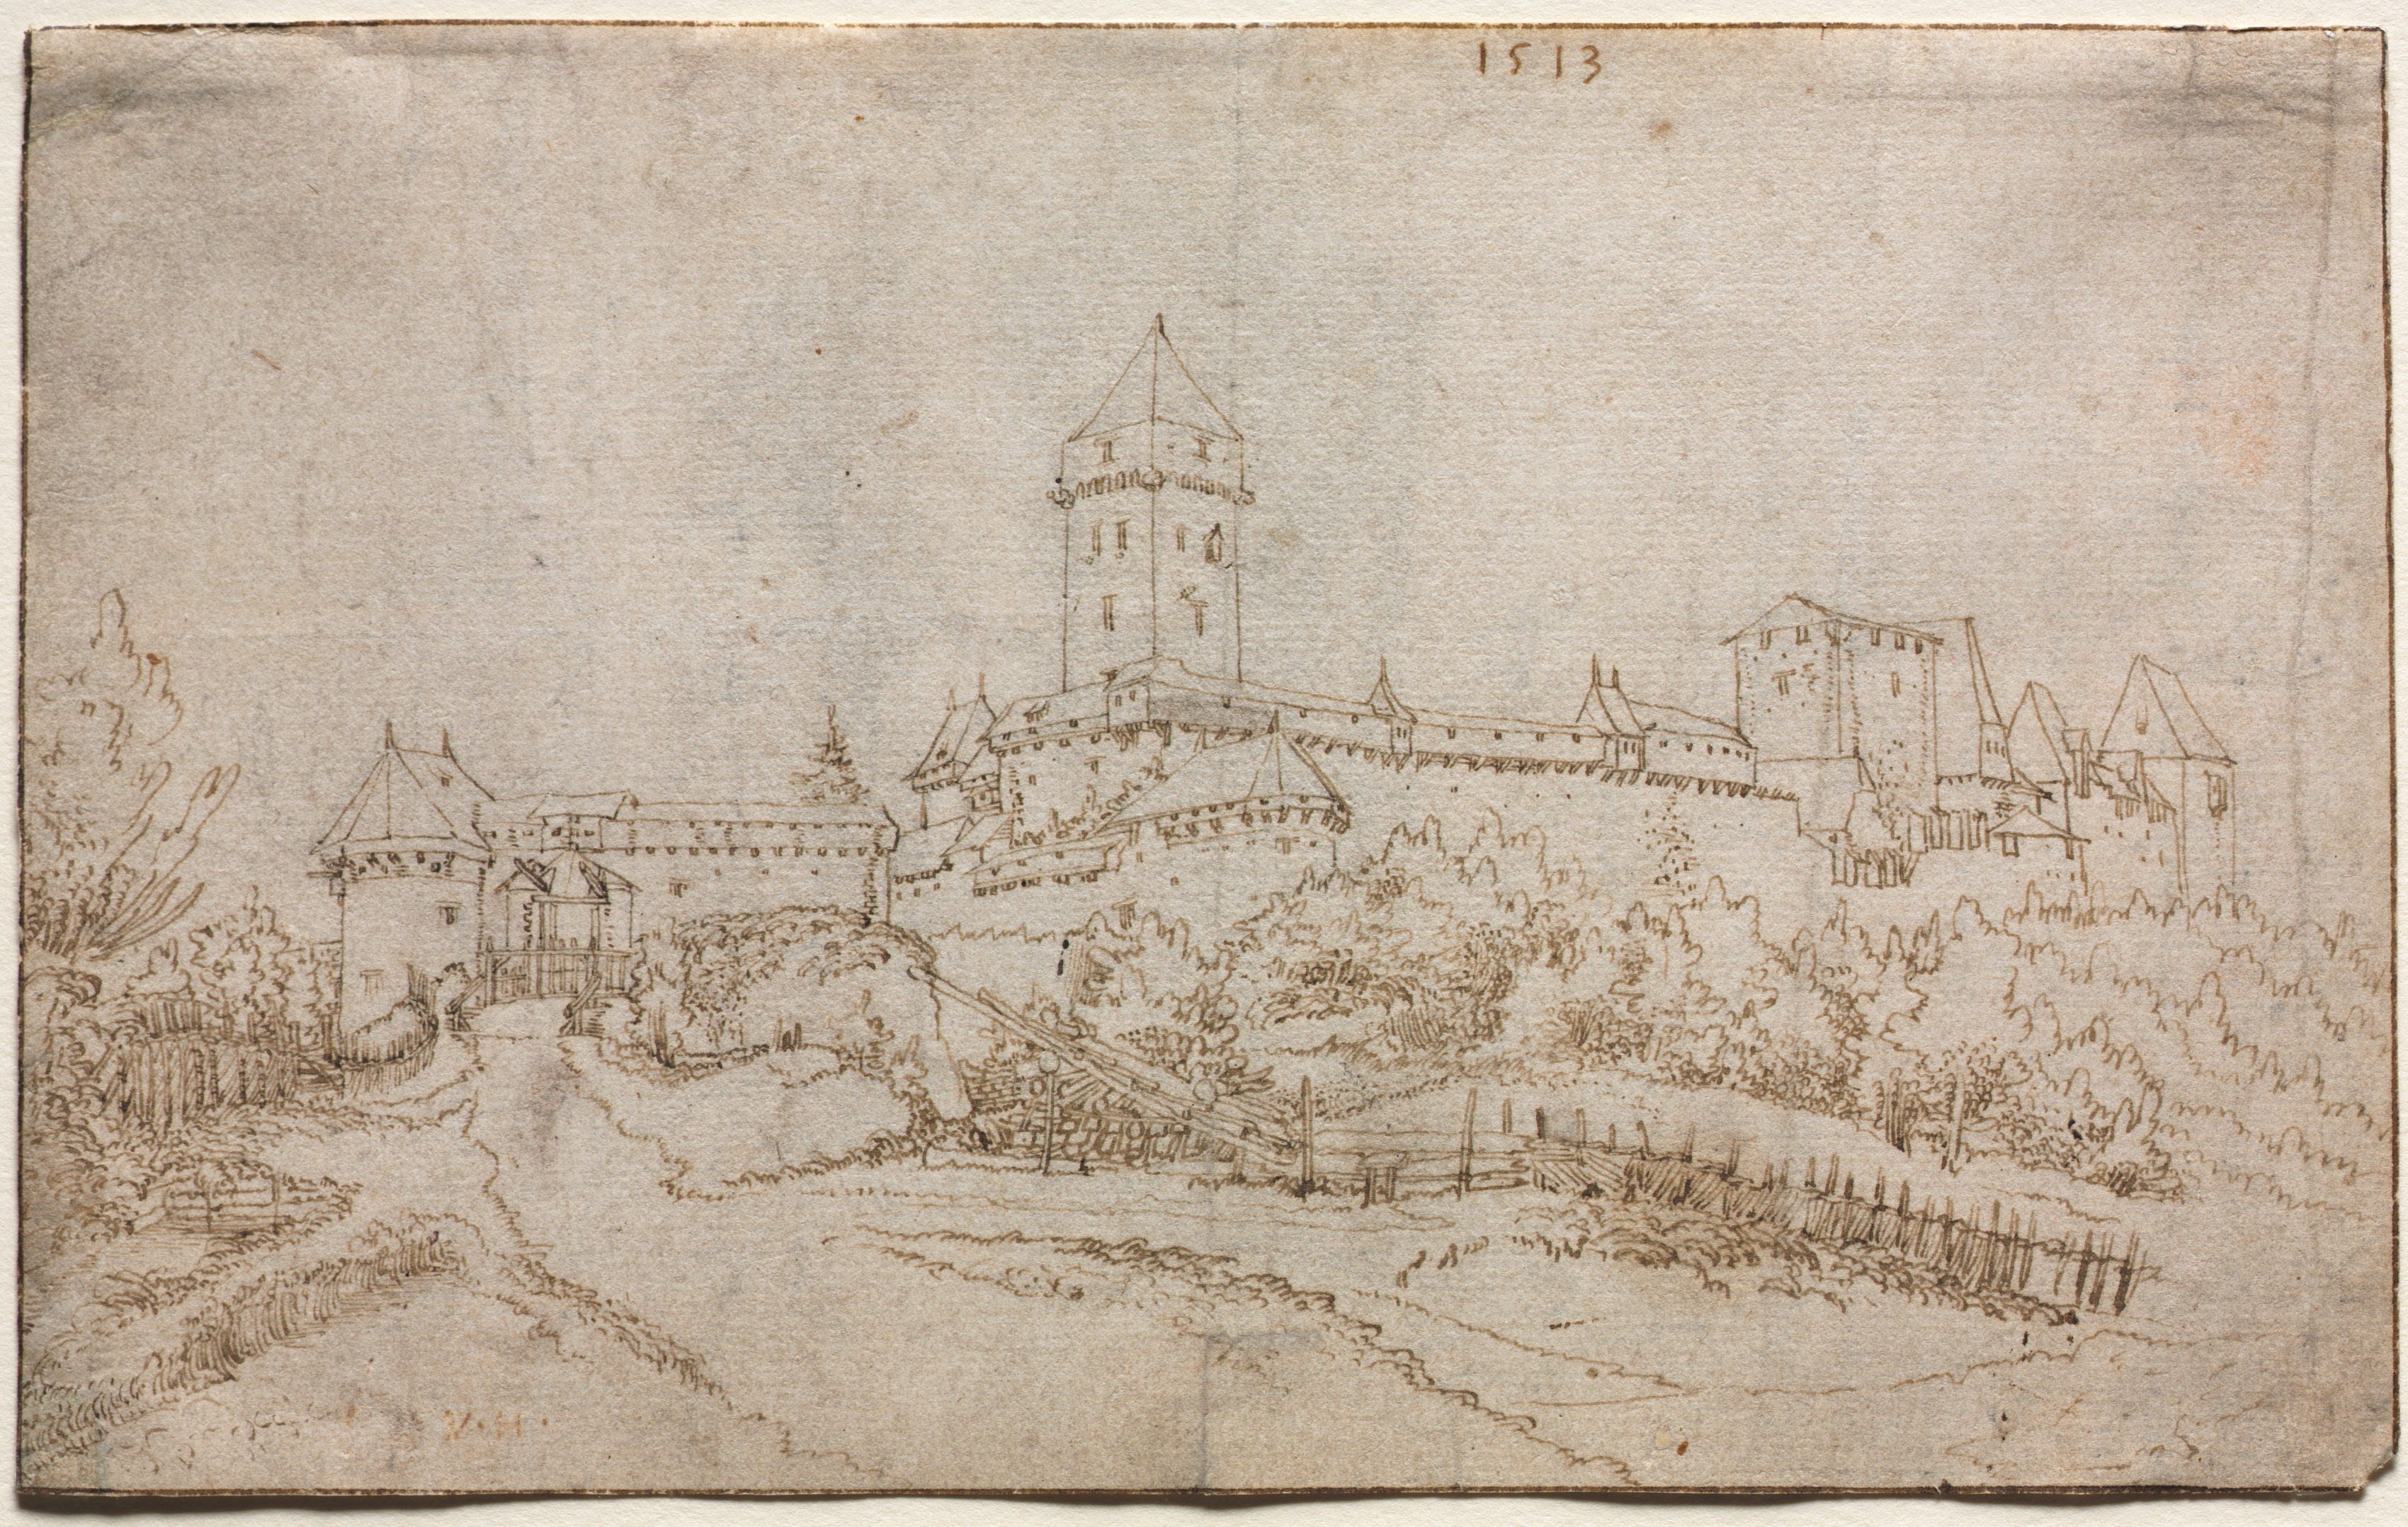 View of a Castle (recto)